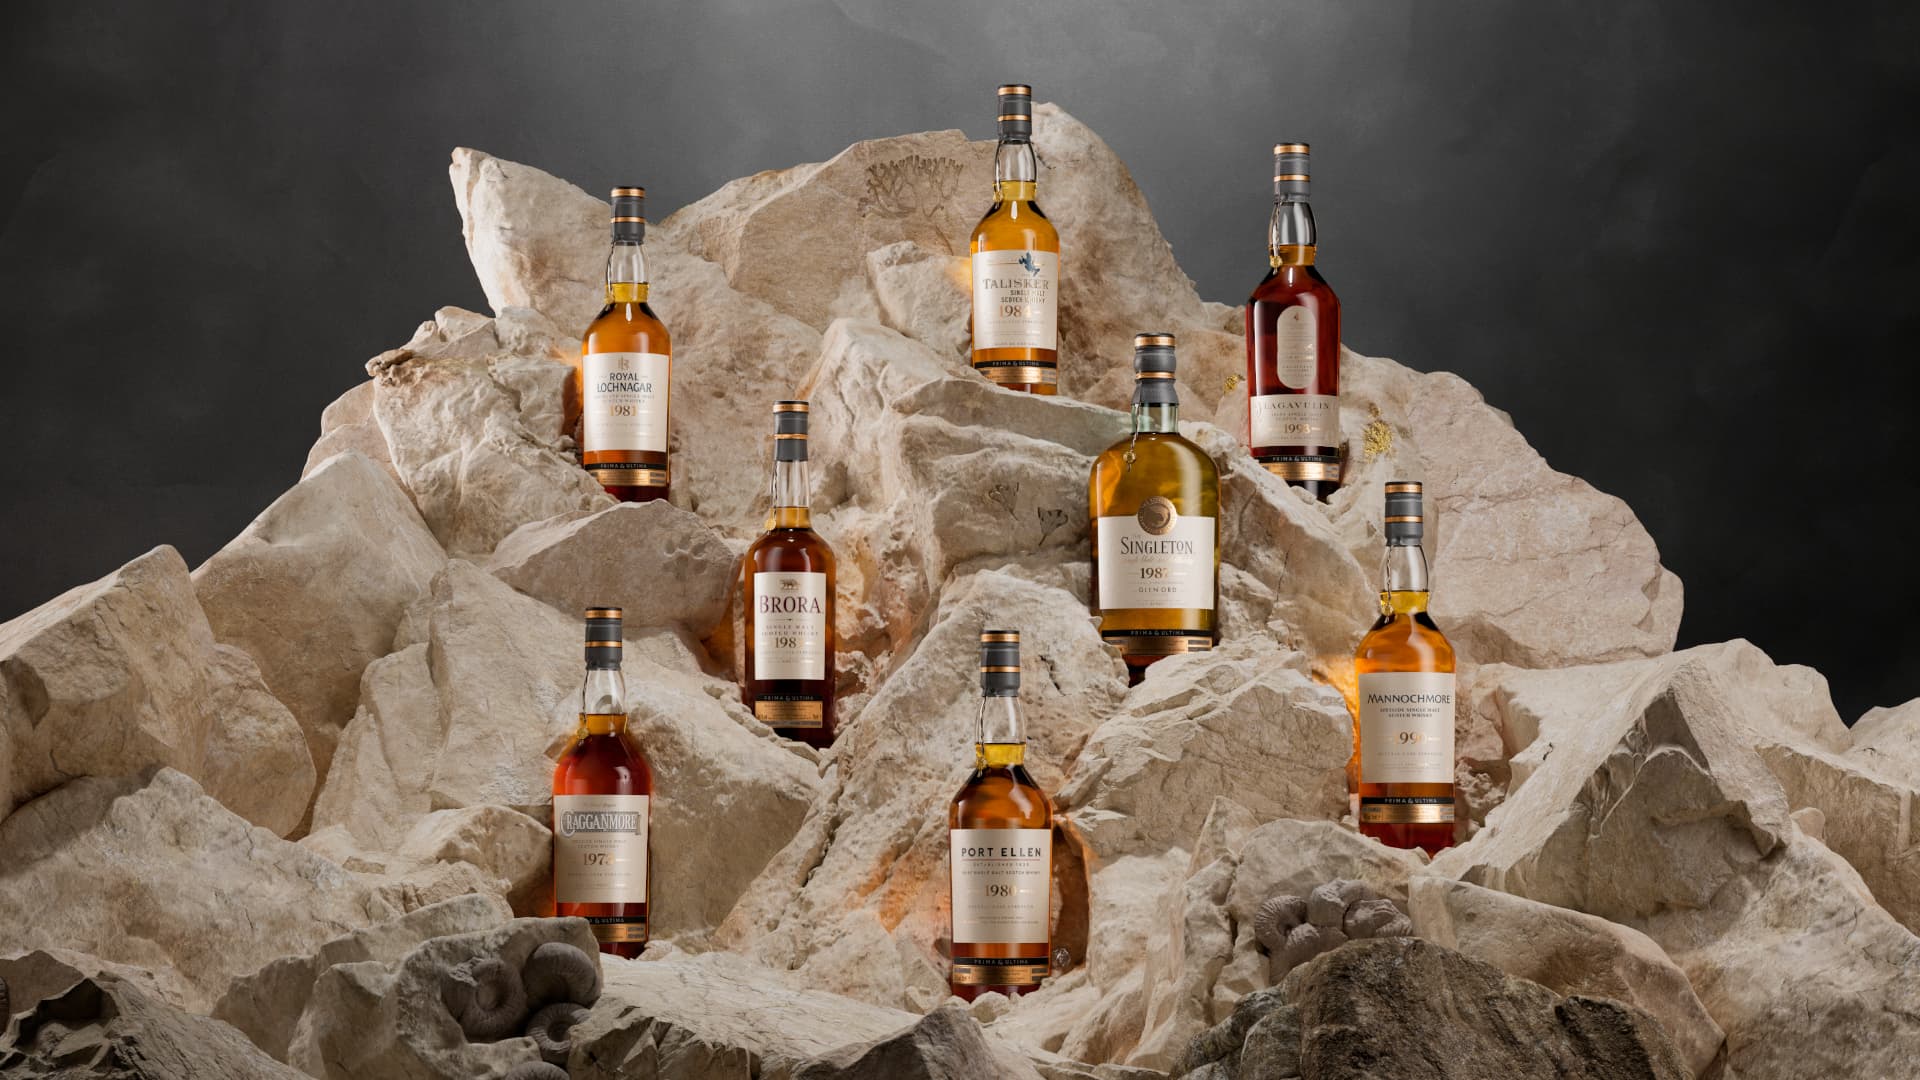 Prima and Ultima Third Release Whiskies set against a natural stone backdrop